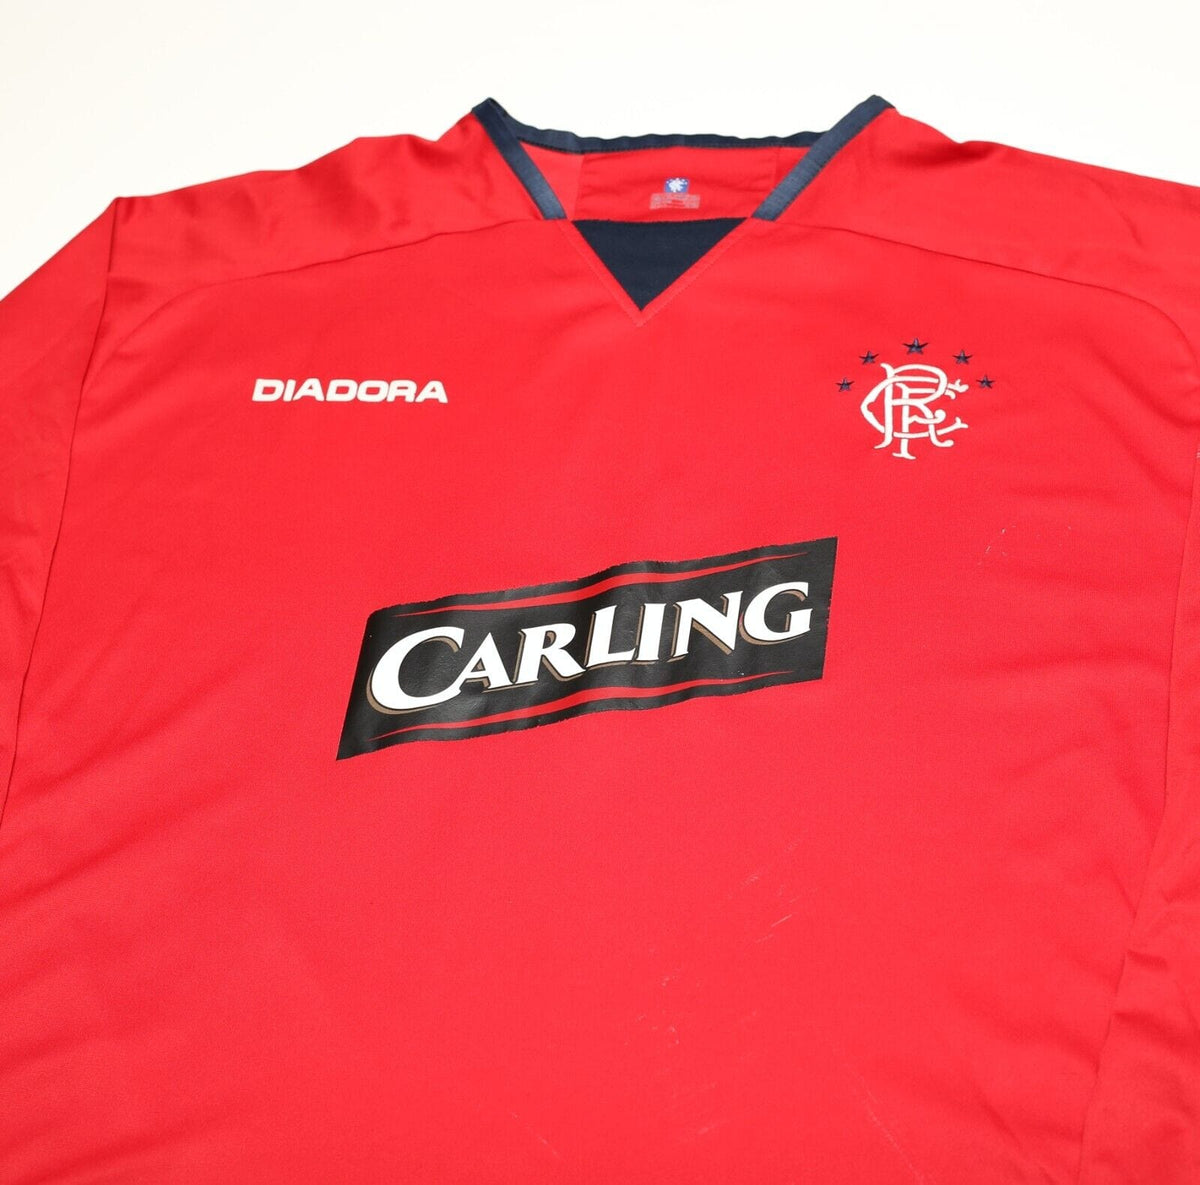 1993-94 Away #8 – Shirts of The Rangers